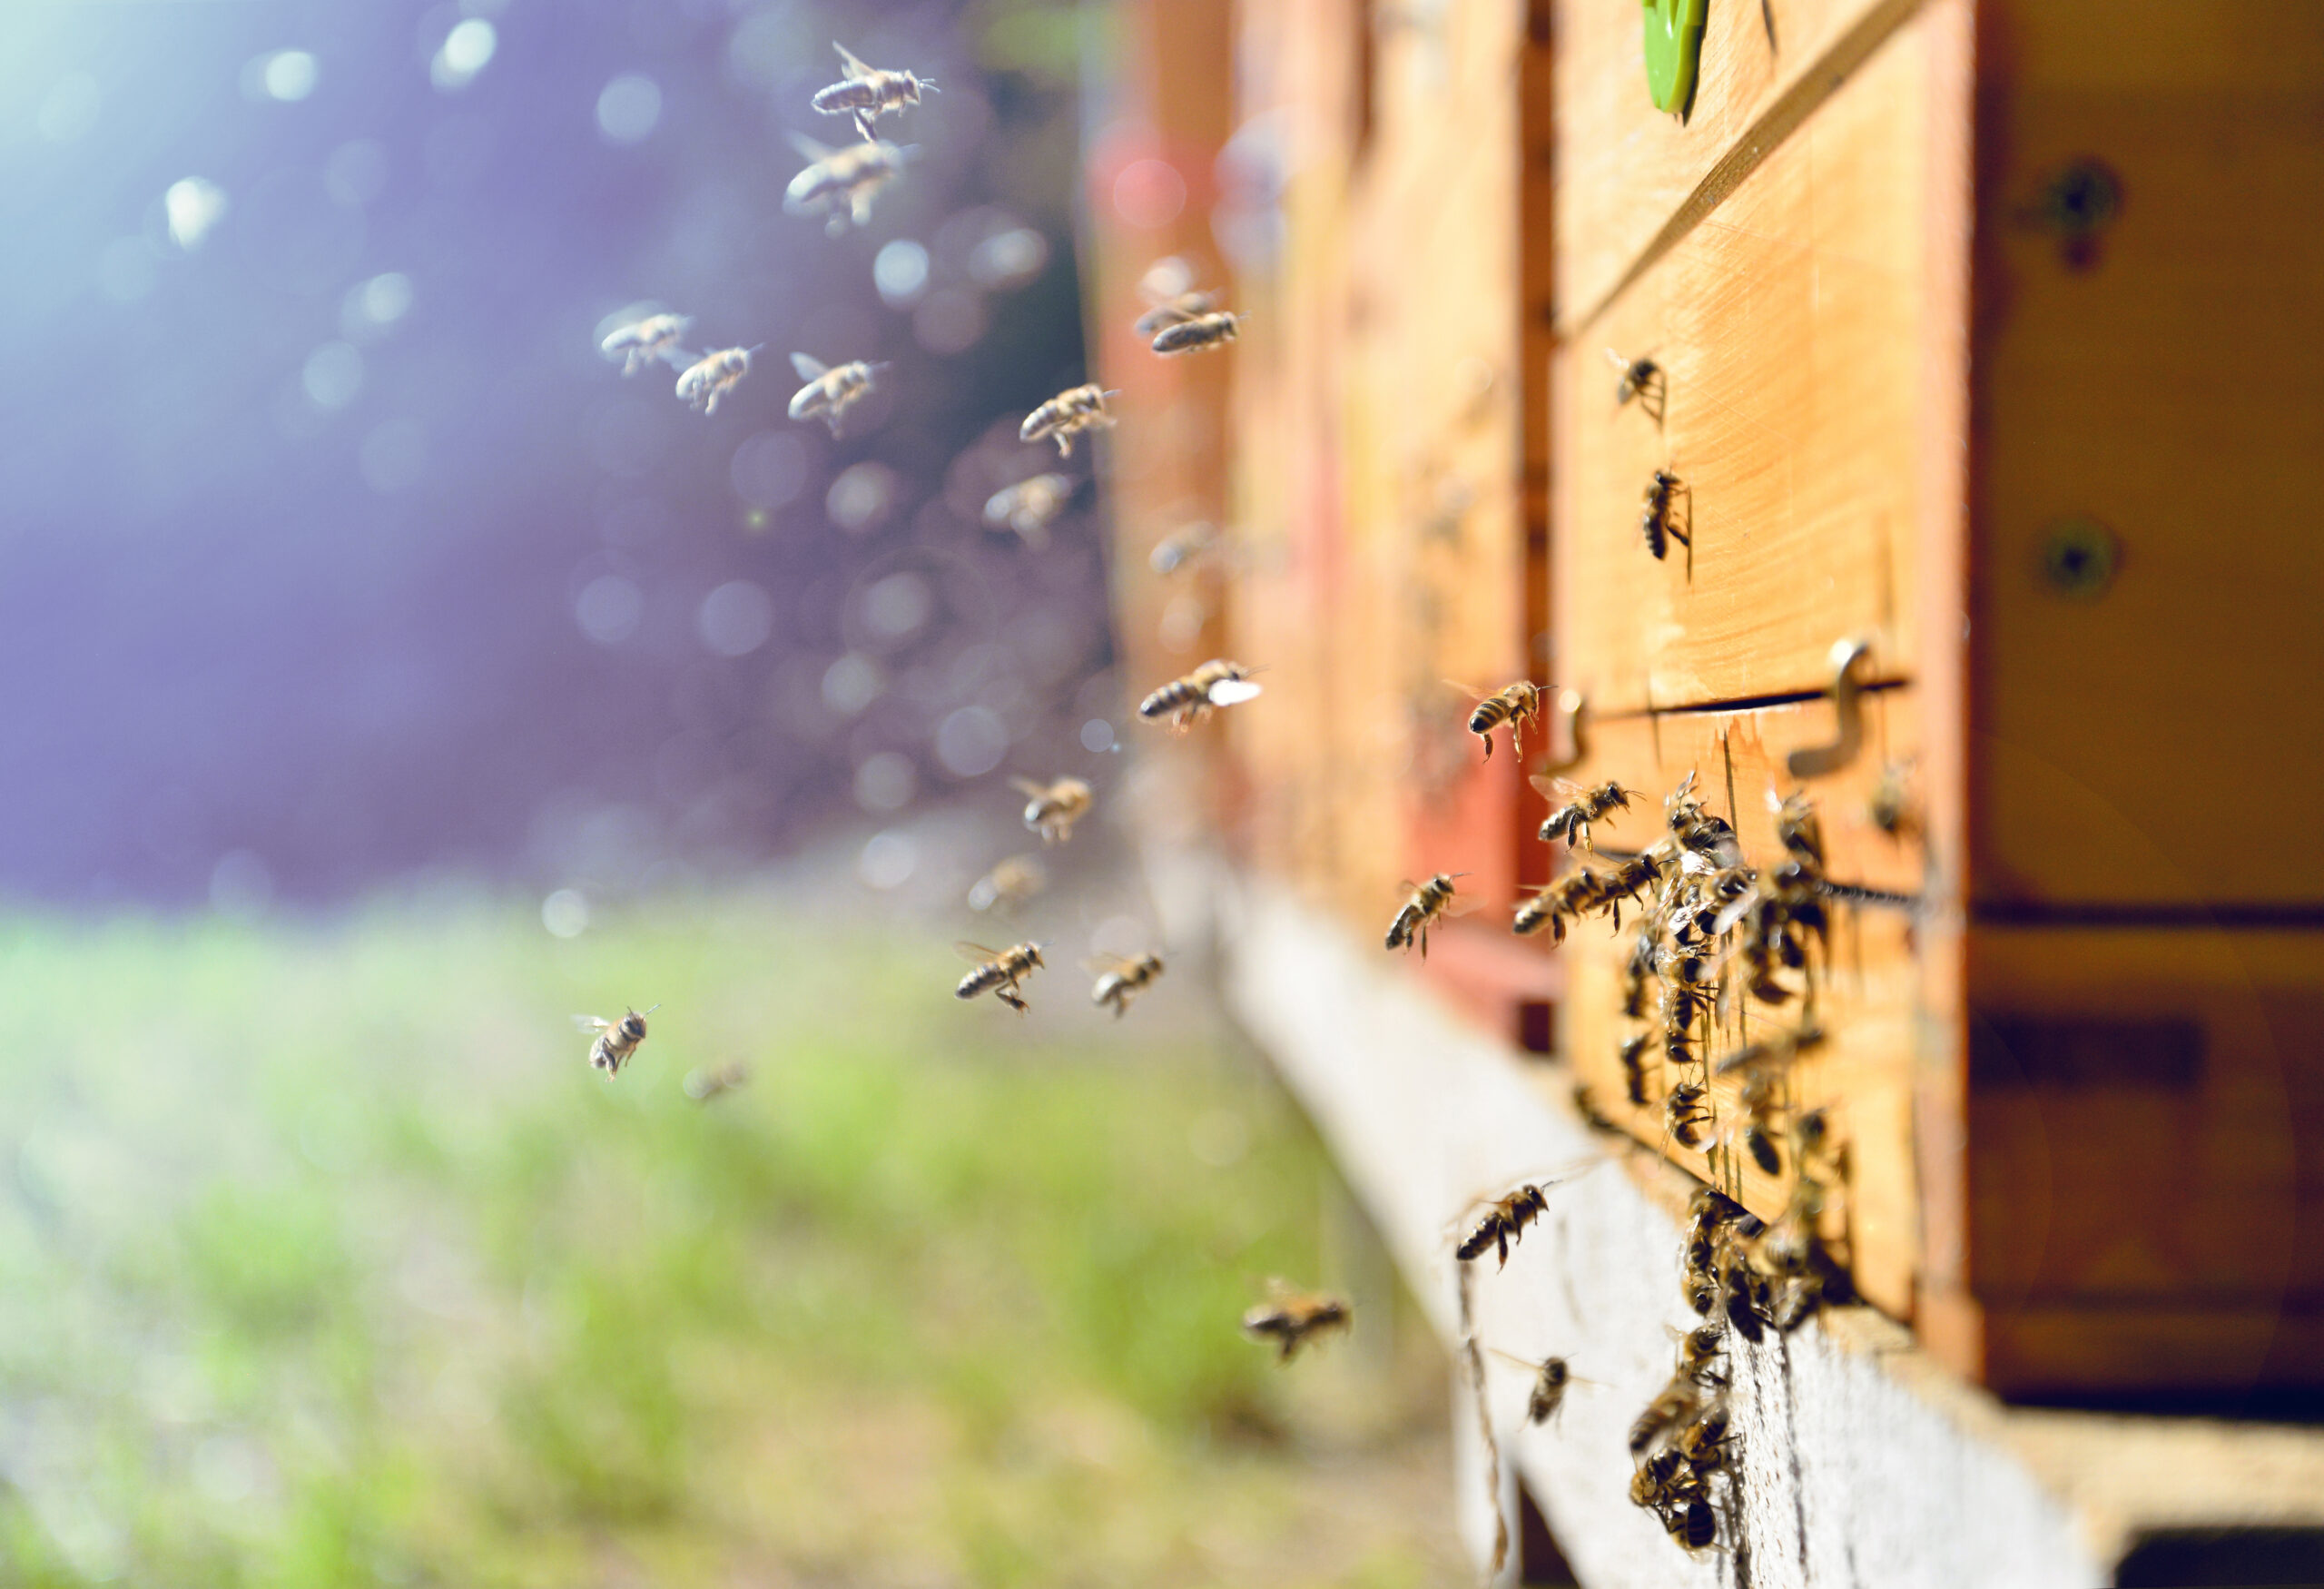 Honey bees are hard-working, wonderful creatures, and beekeeping is an enriching hobby.